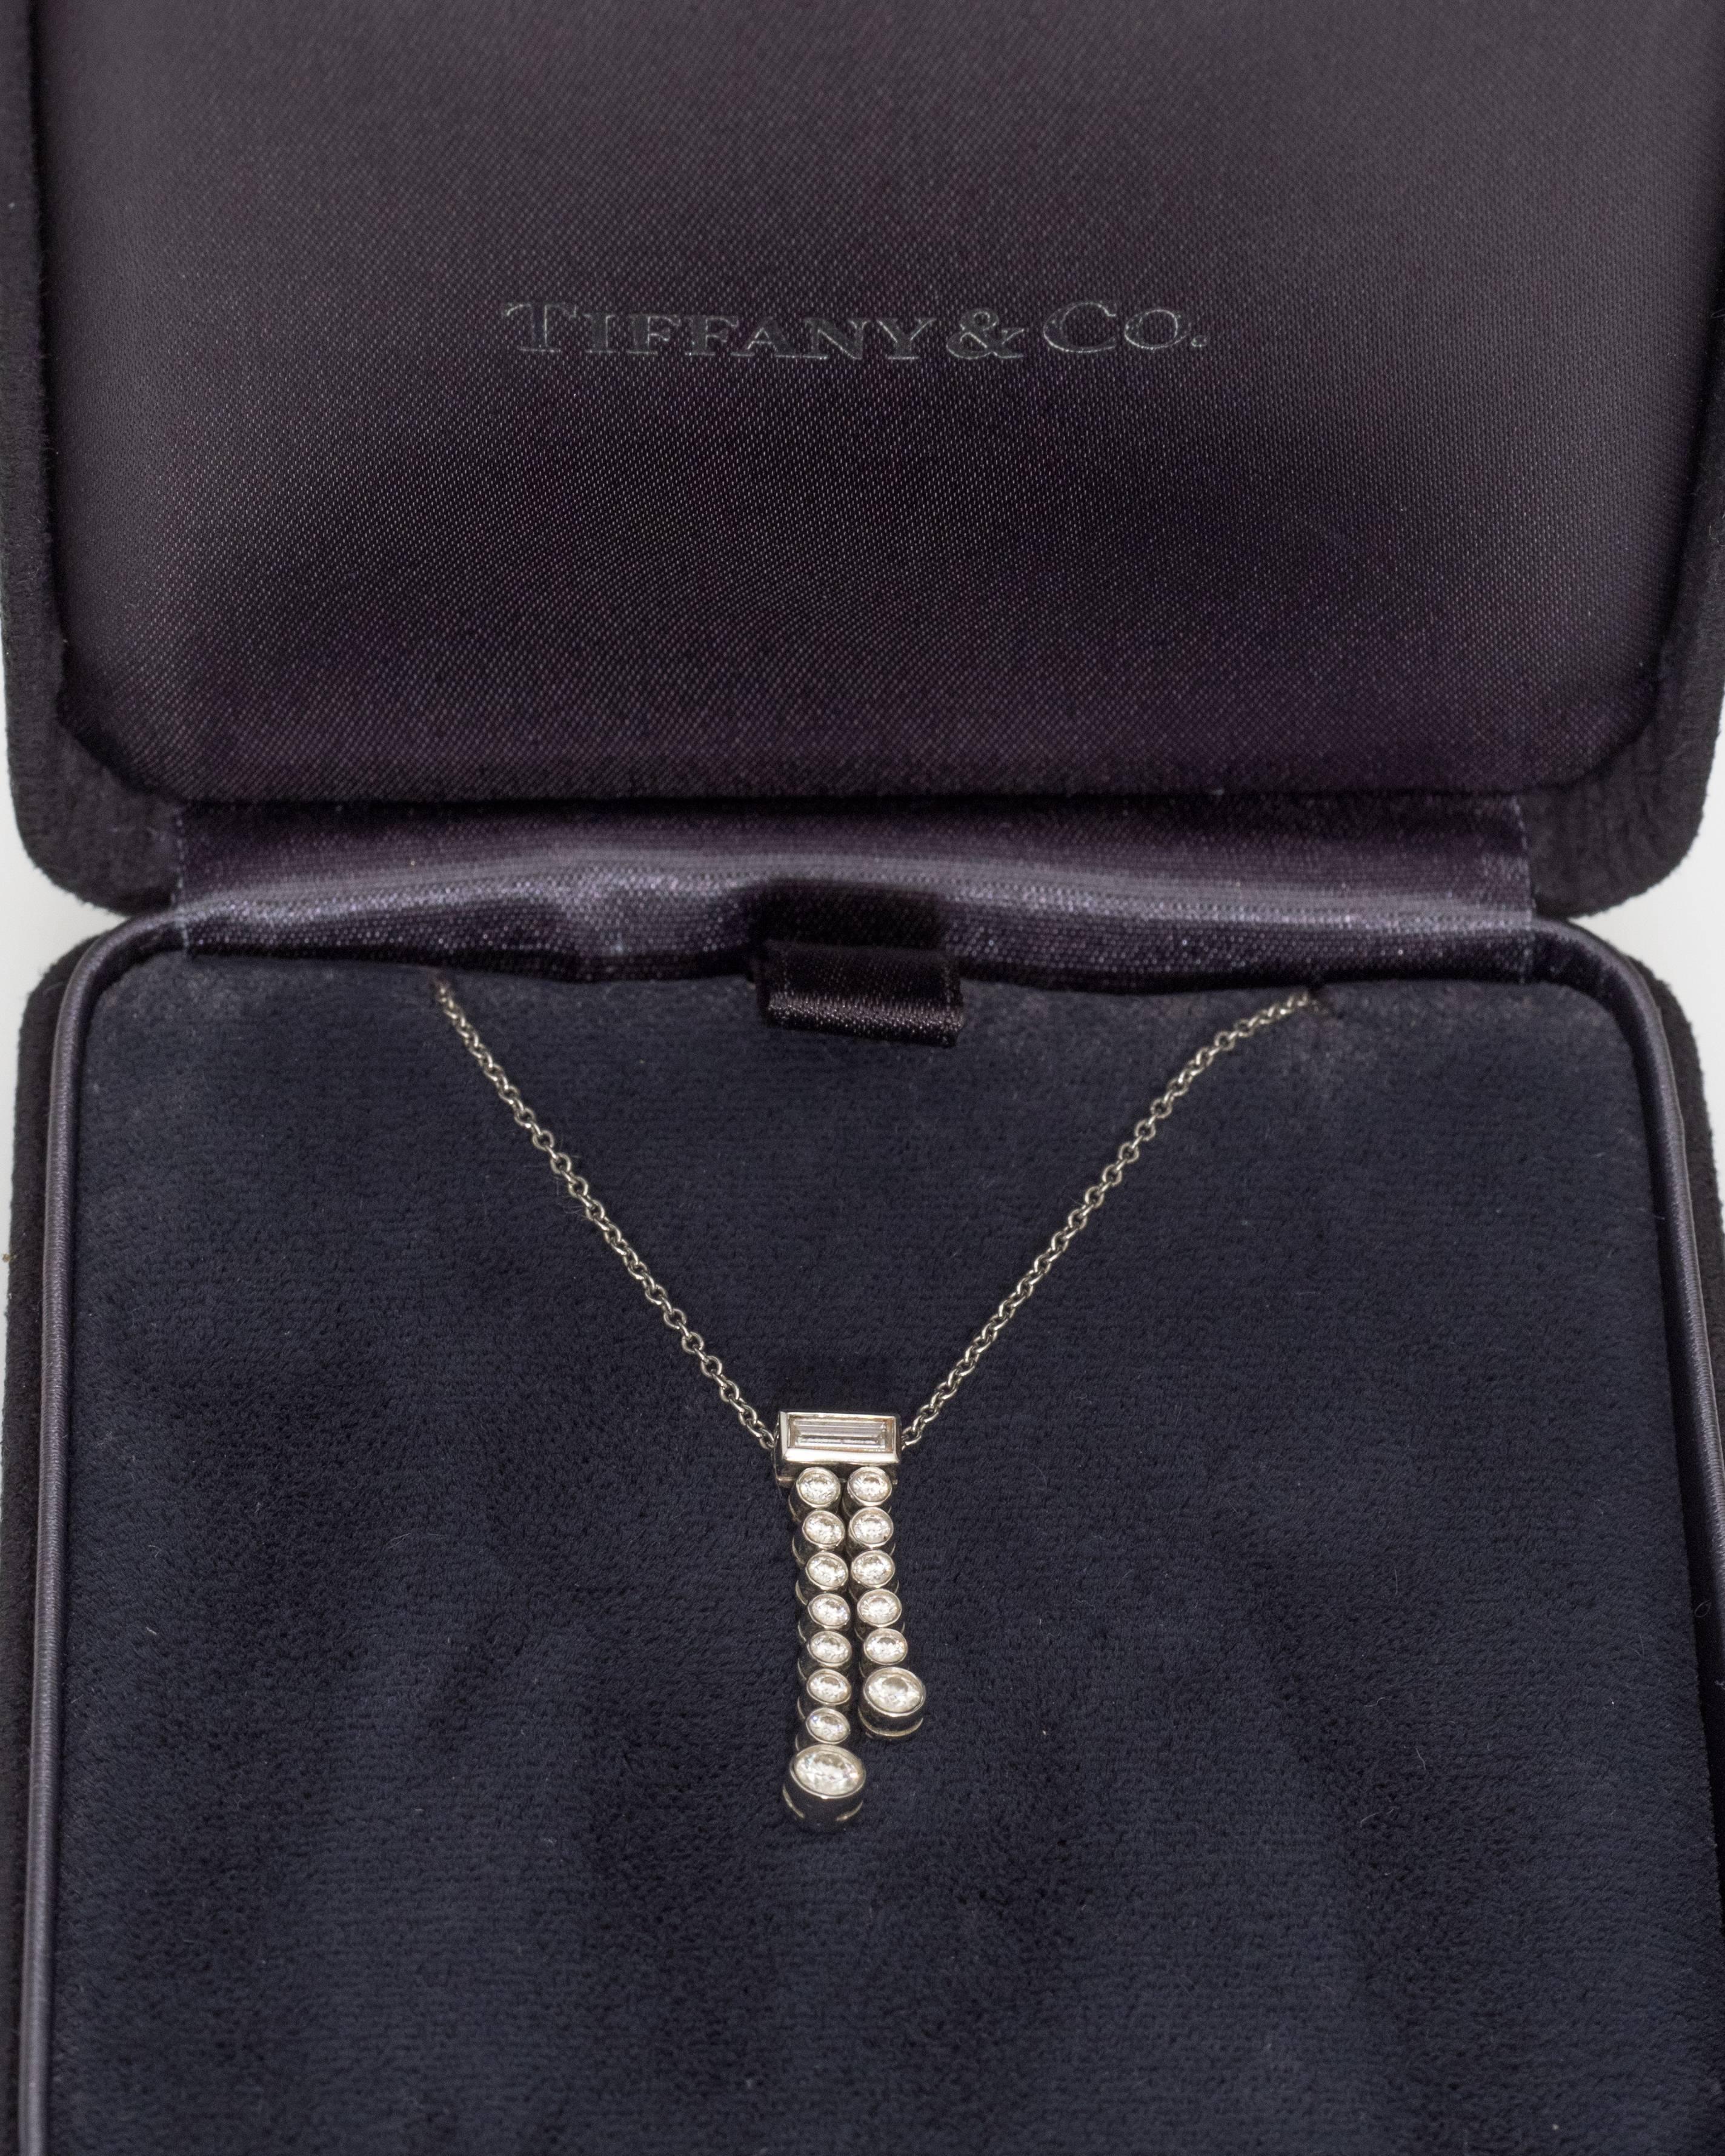 This Tiffany & Co. necklace is part of the jazz collection. The pendant has two strands of diamonds next to each other - one with eight diamonds, the other with six. The top of the pendant has a baguette diamond right where the platinum connections